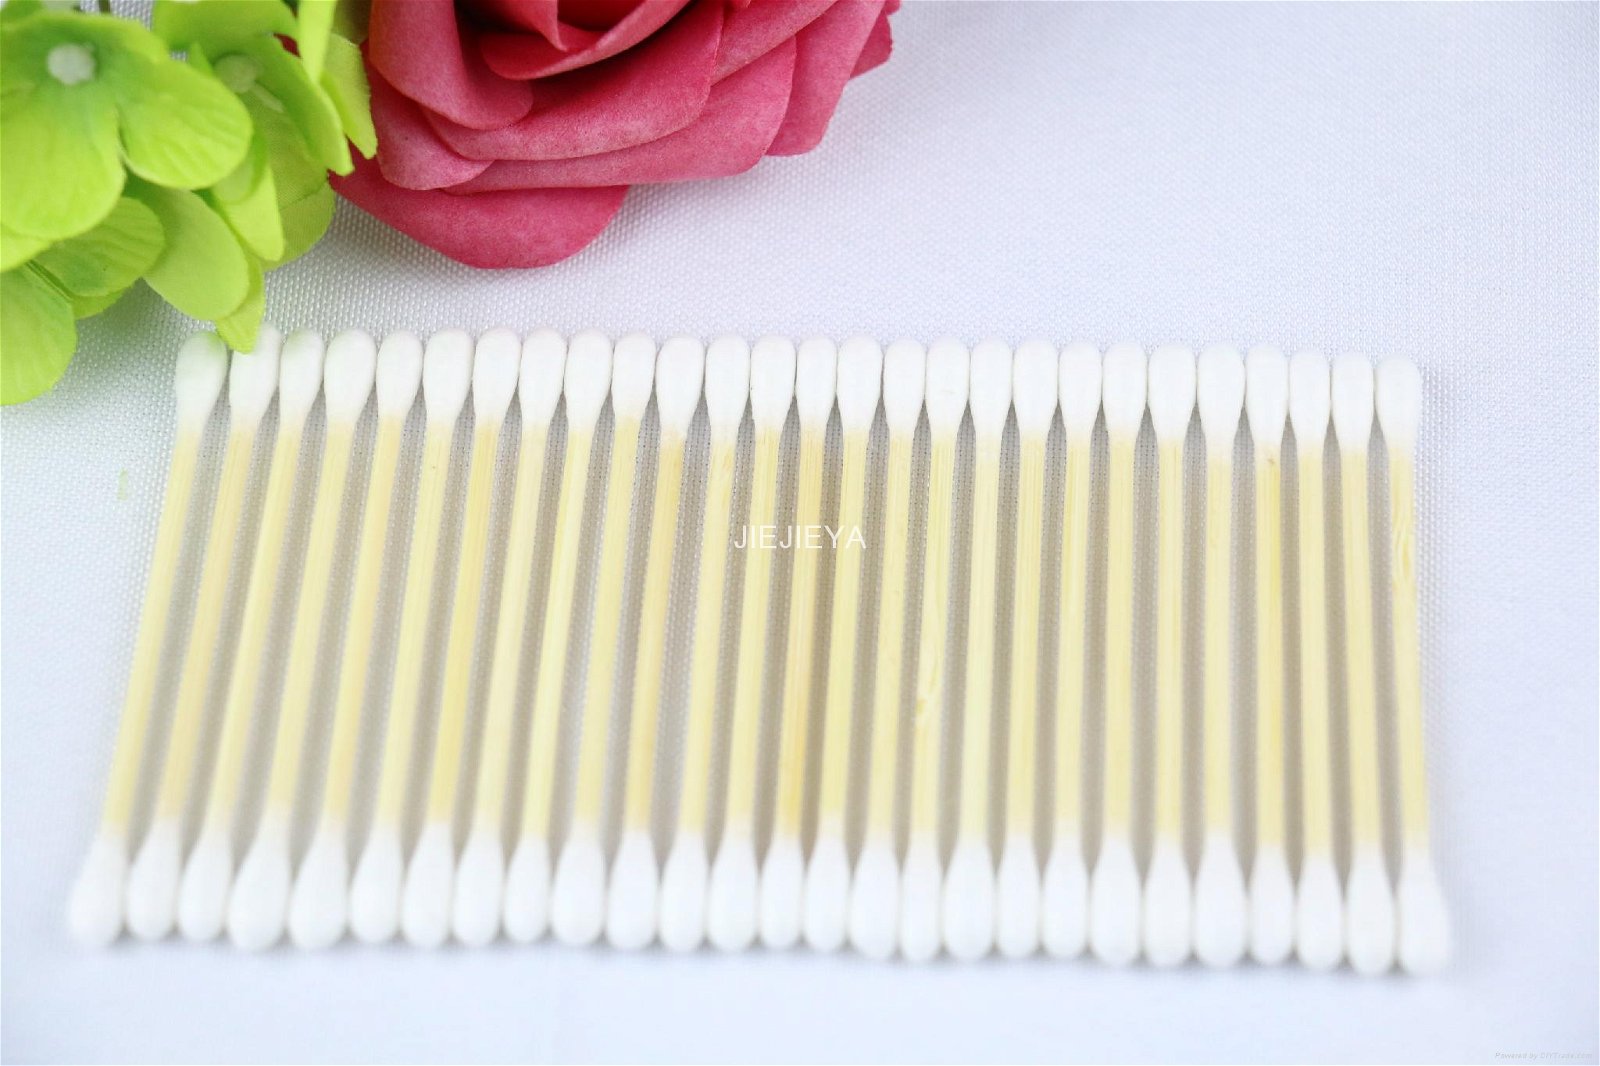 200p bamboo stick cotton bud wooden cotton swabs in box baby care ear clean manu 3